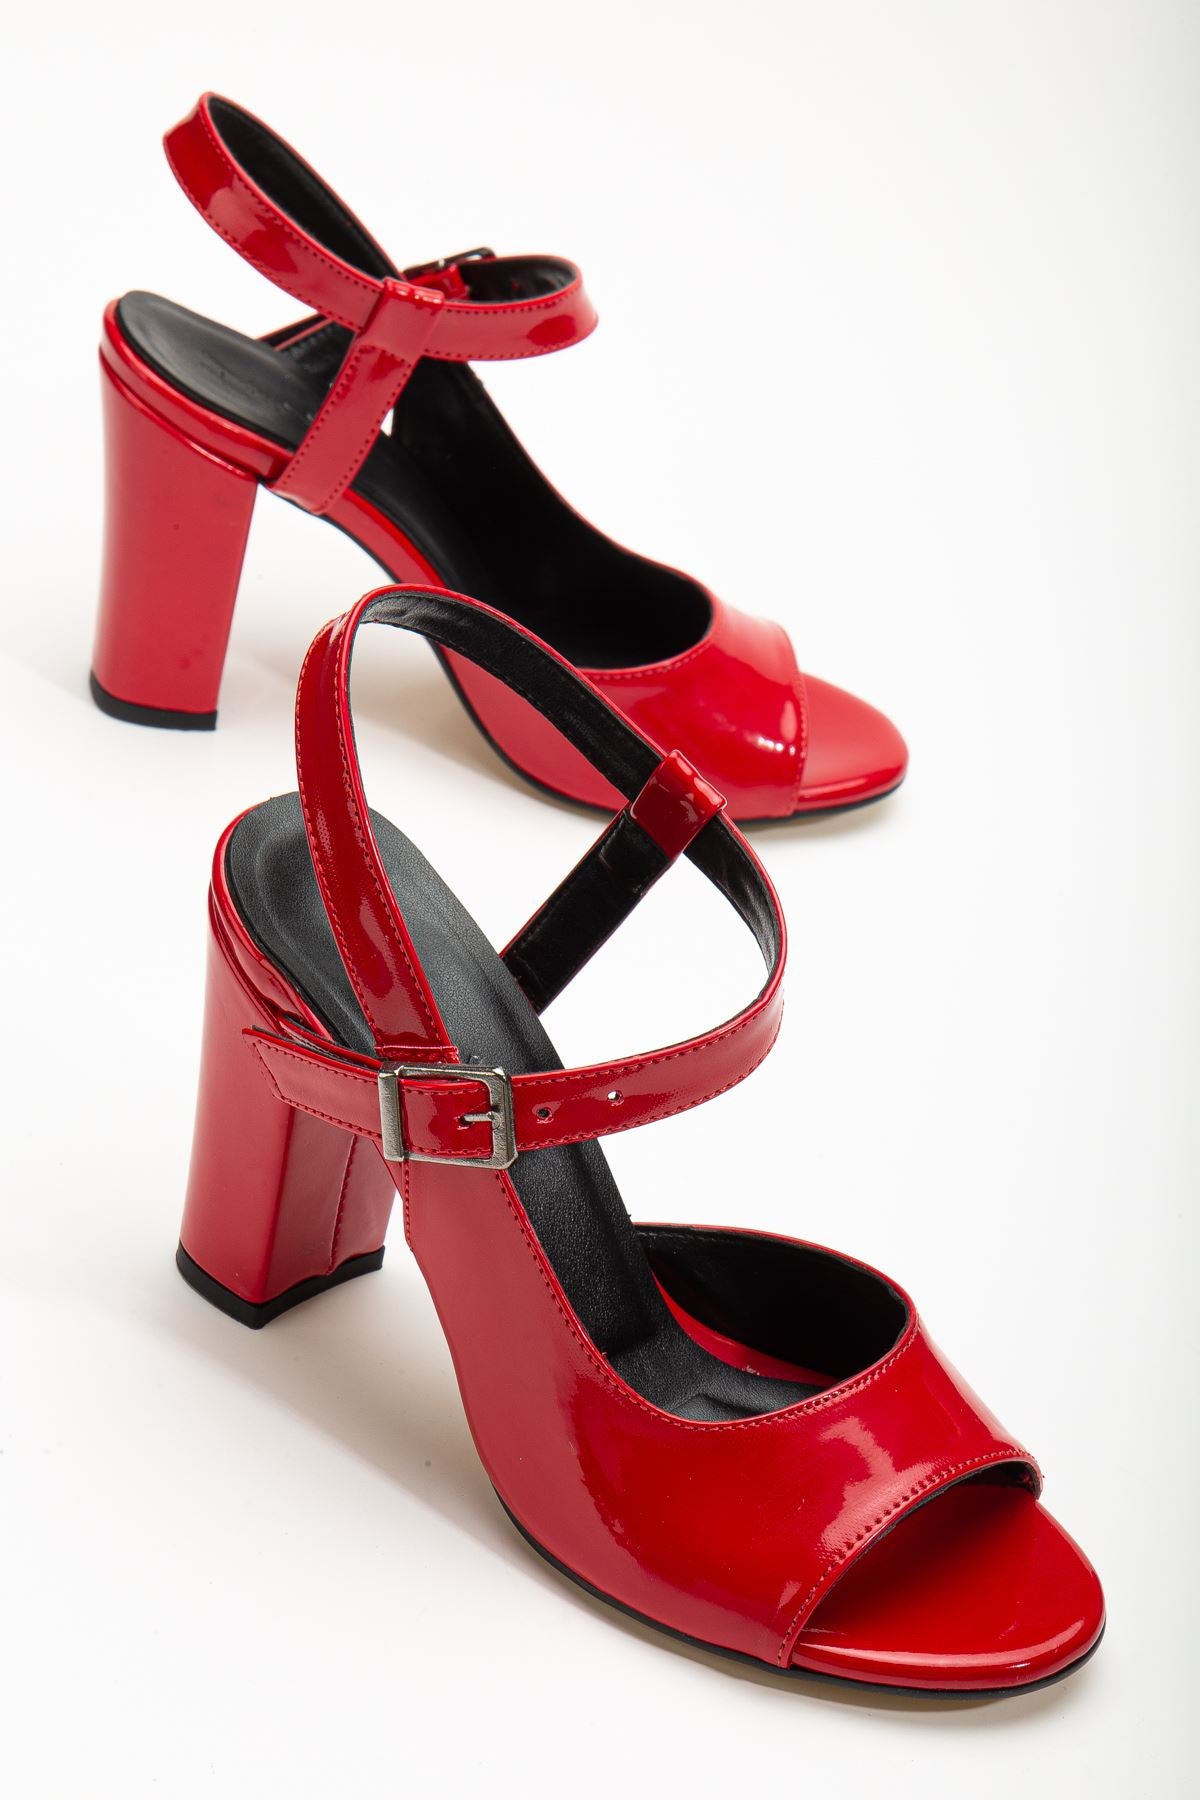 Lovisa Heeled Red Patent Leather Women's Shoes - STREETMODE™